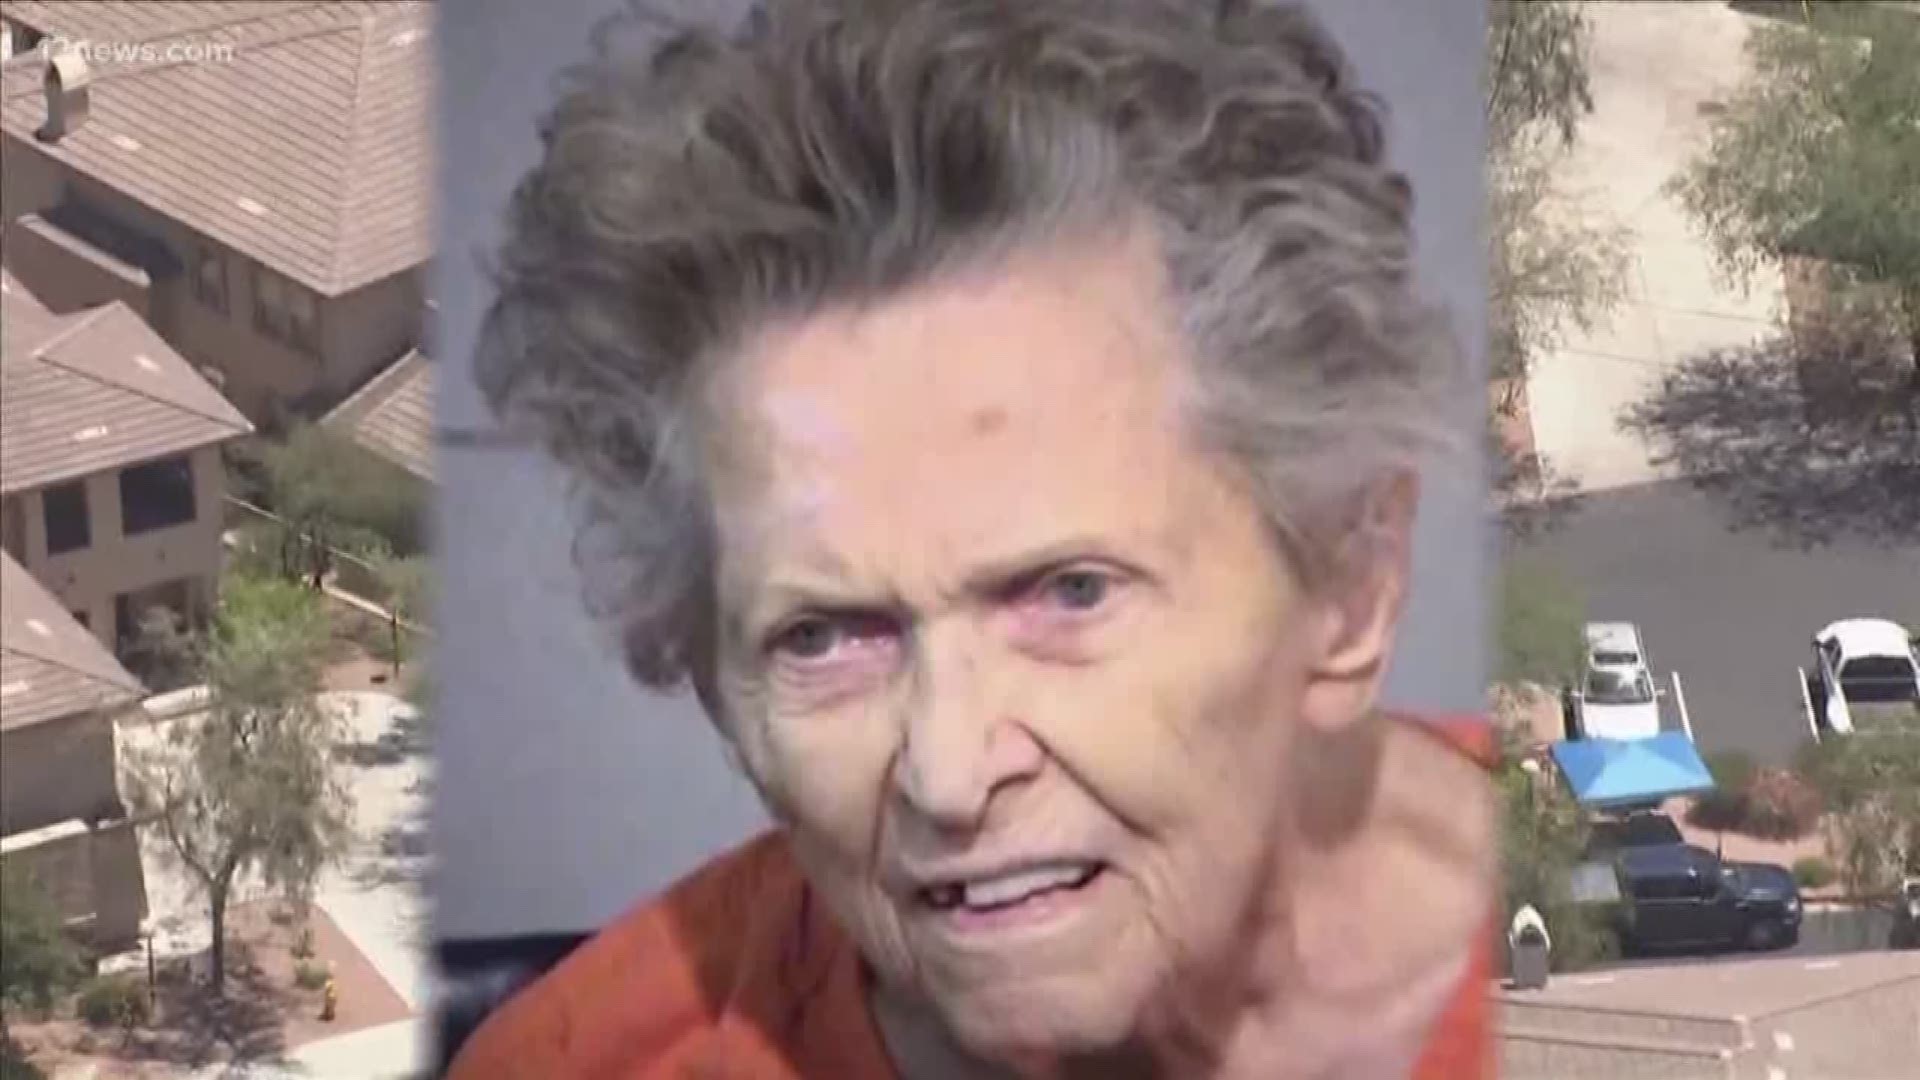 In July 2018, Anna Mae Blessing was 92 when she shot and killed her son Thomas Blessing after he said he was going to put her in a home. Anna Mae Blessing died before she went to trial.